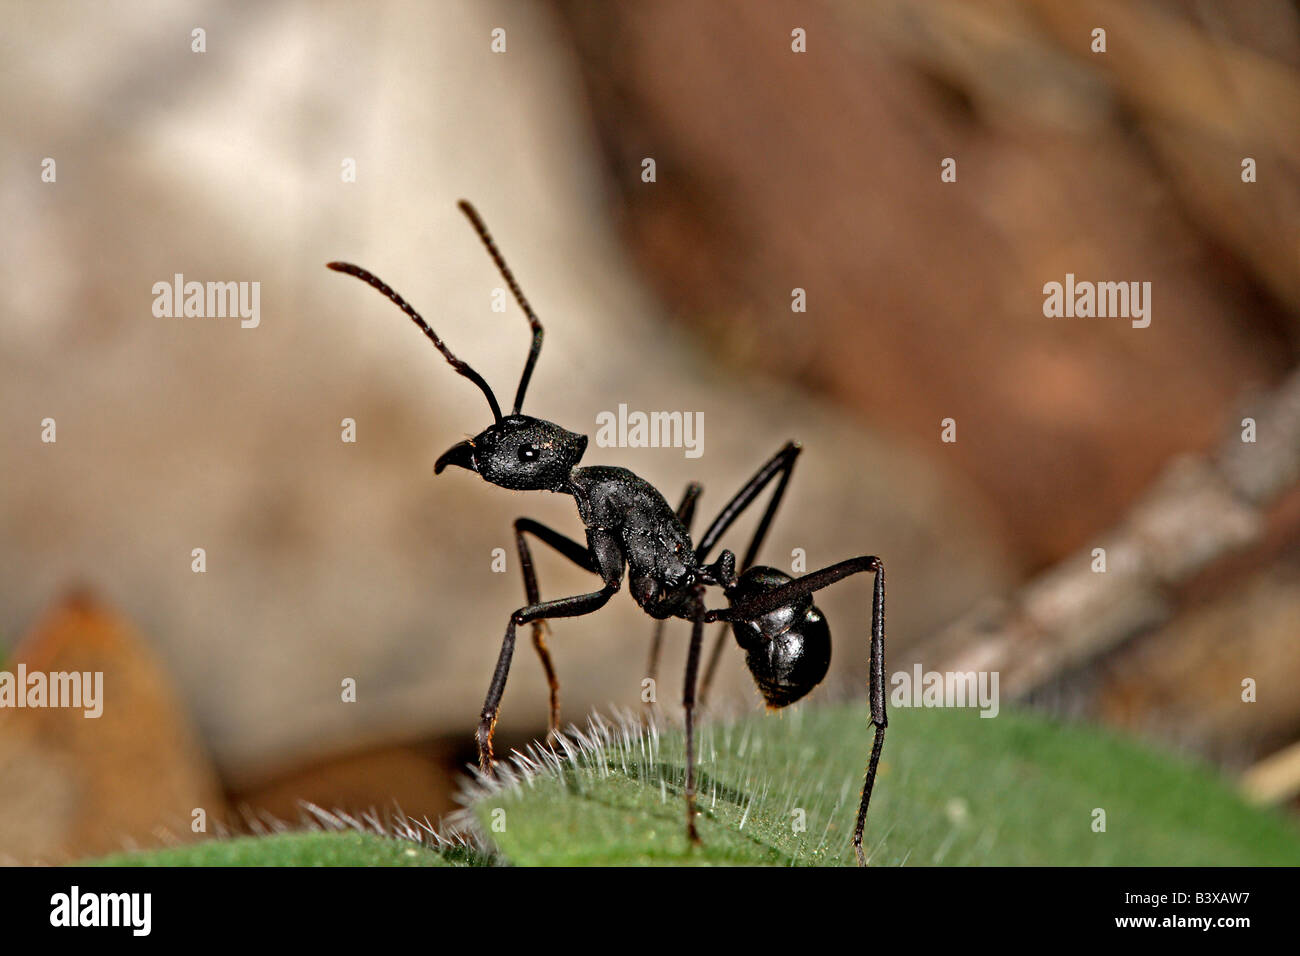 Worker ant from the genus Rhytidoponera (Subfamily Ponerinae) in an alert stance, New South Wales, Australia Stock Photo